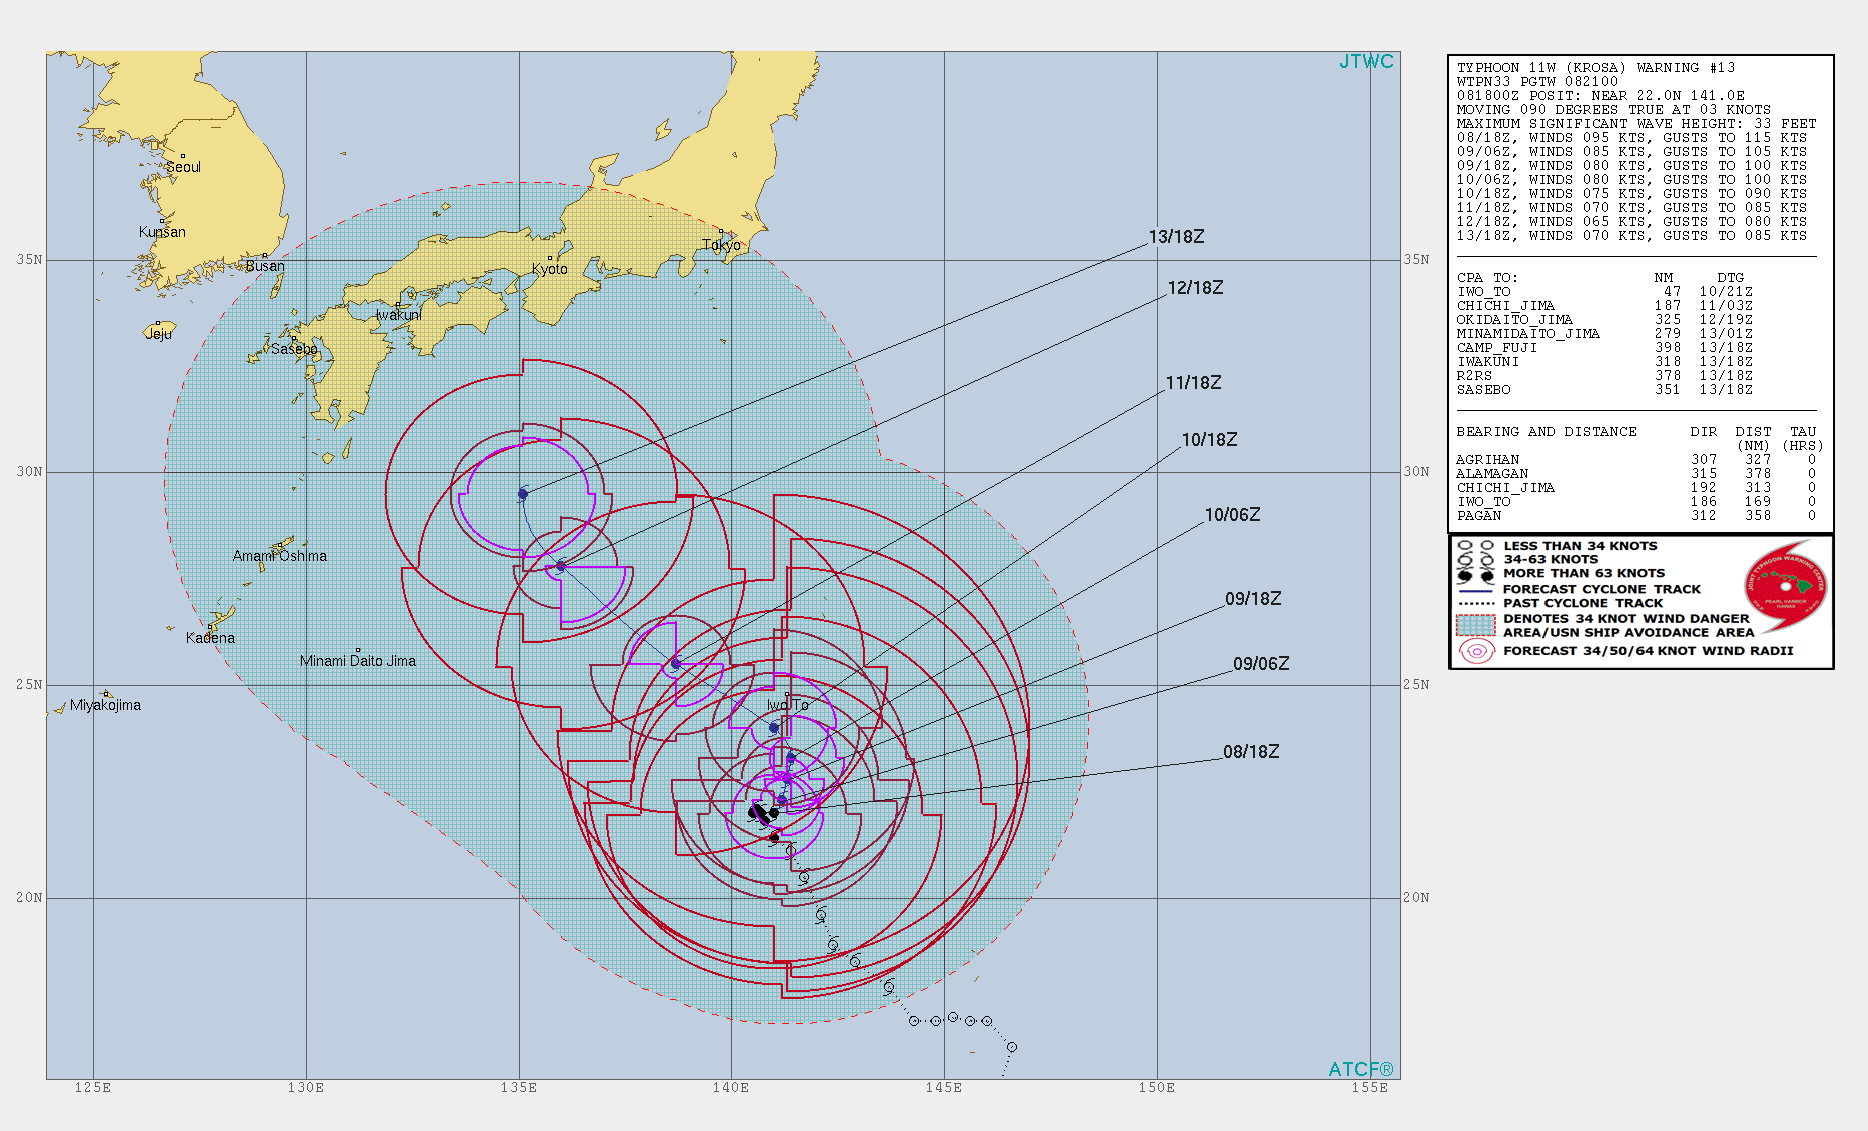 KROSA(11W): WARNING 13. GRADUAL WEAKENING IS FORECAST FOR THE NEXT 96H BUT SOME RE-INTENSIFICATION IS POSSIBLE WHILE APPROACHING SOUTHERN JAPAN IN 120H